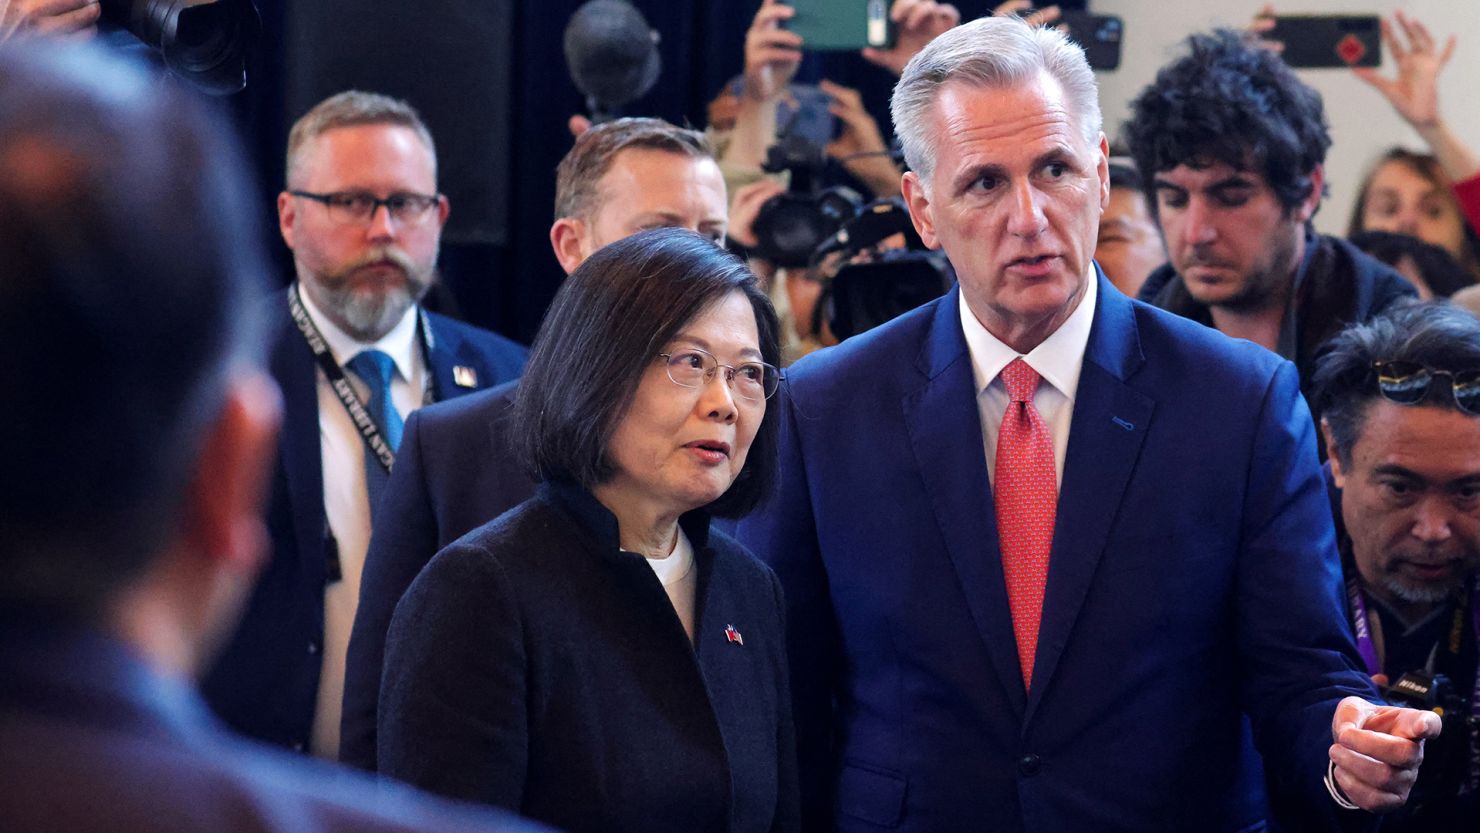 Taiwan's President Tsai Ing-wen meets the US Speaker of the House Kevin McCarthy at the Ronald Reagan Presidential Library in Simi Valley, California on April 5.